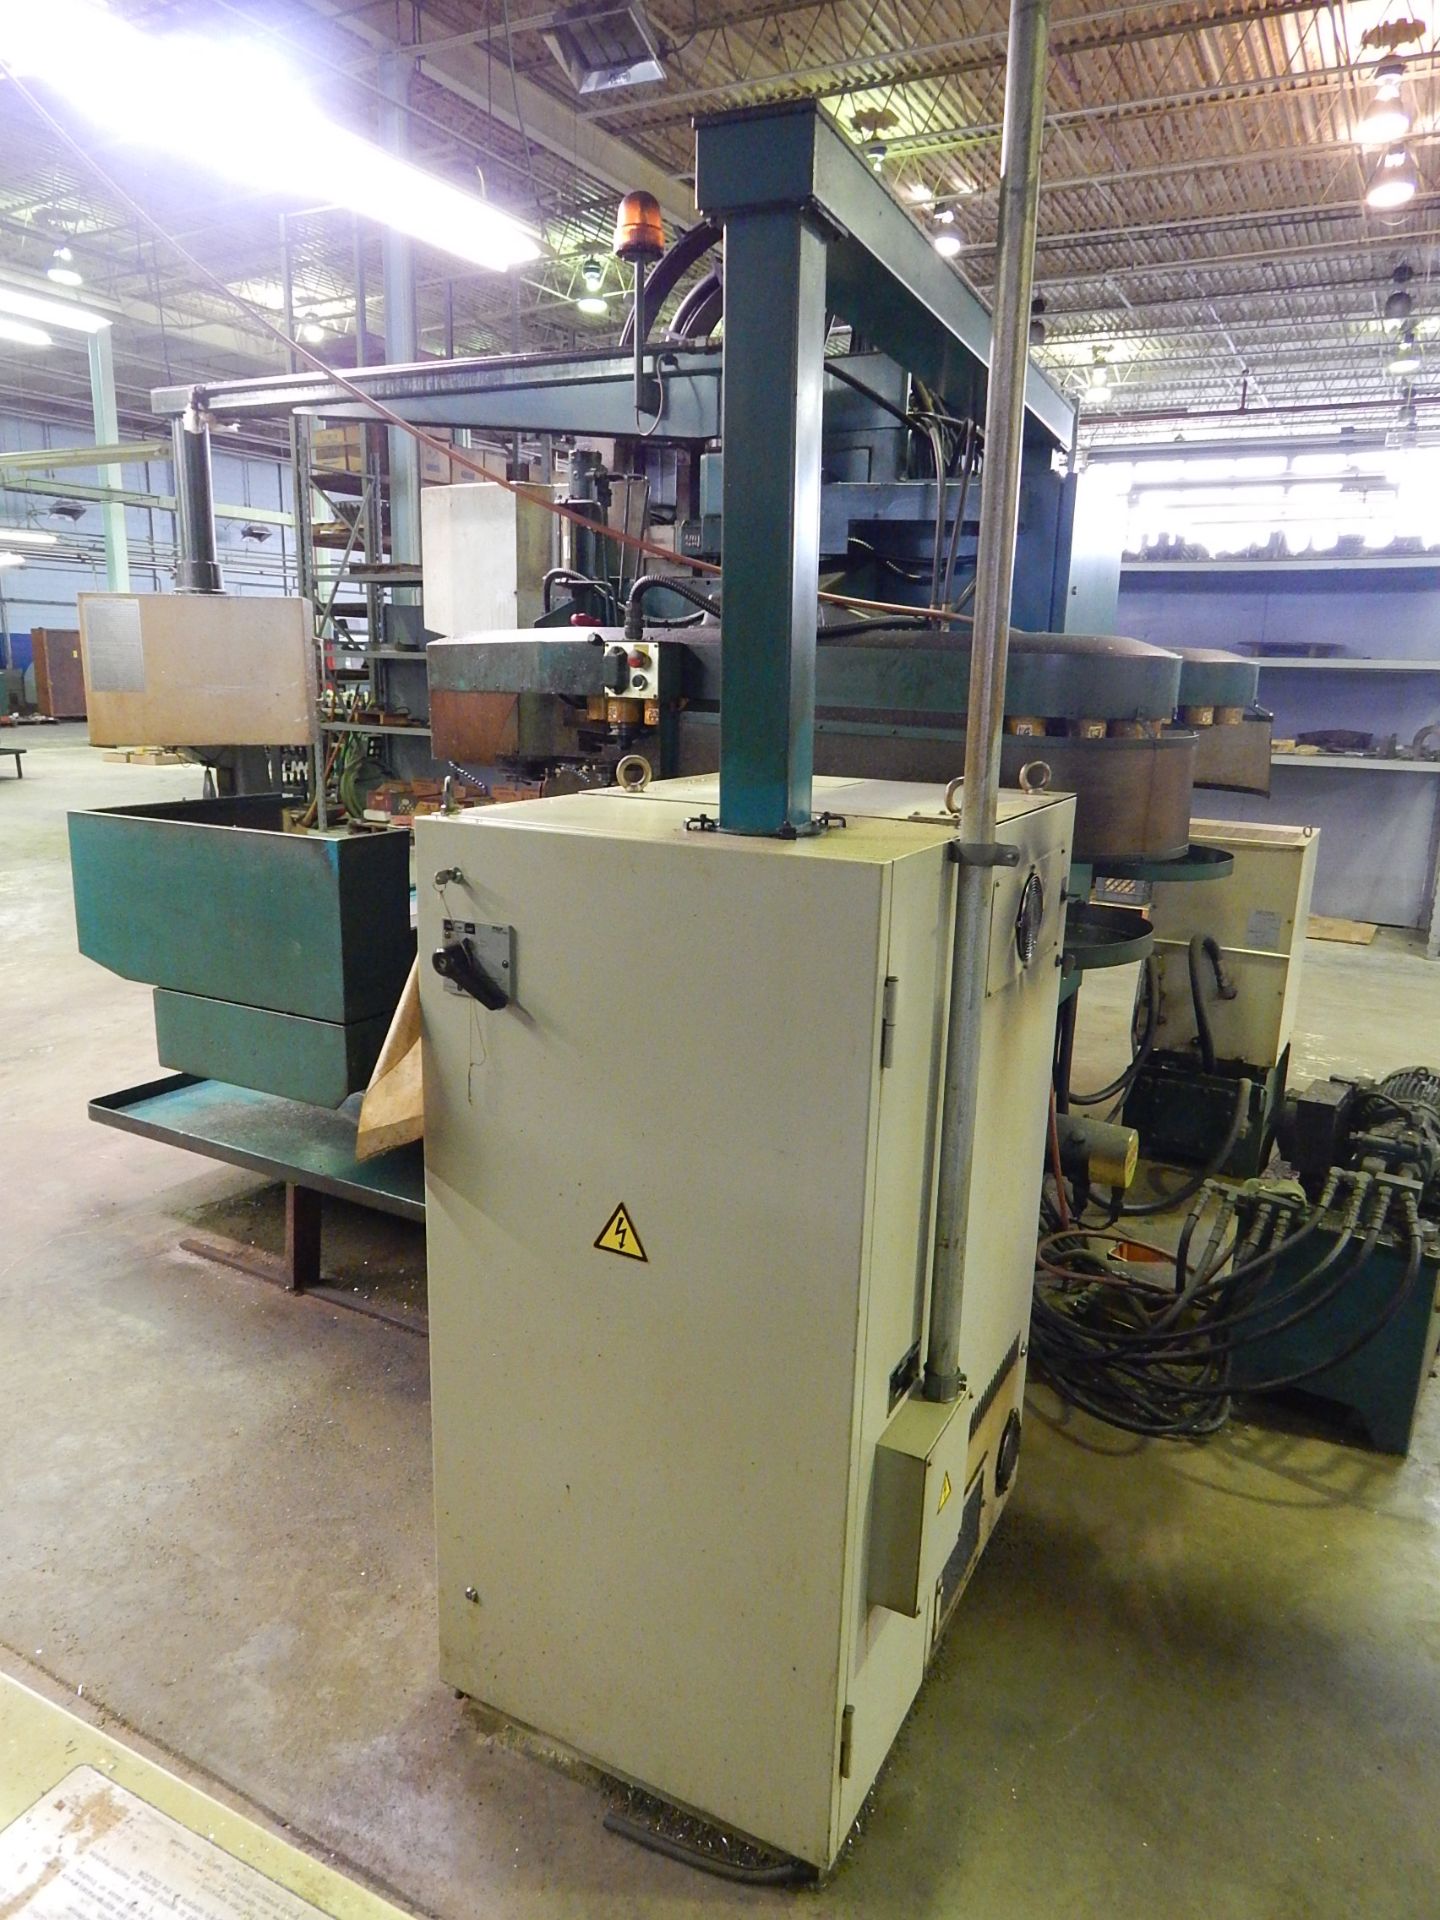 Matsuura Model MC-1000V-DC Twin Spindle CNC Vertical Machining Center, s/n 85044729, New 1985, Fanuc - Image 11 of 13